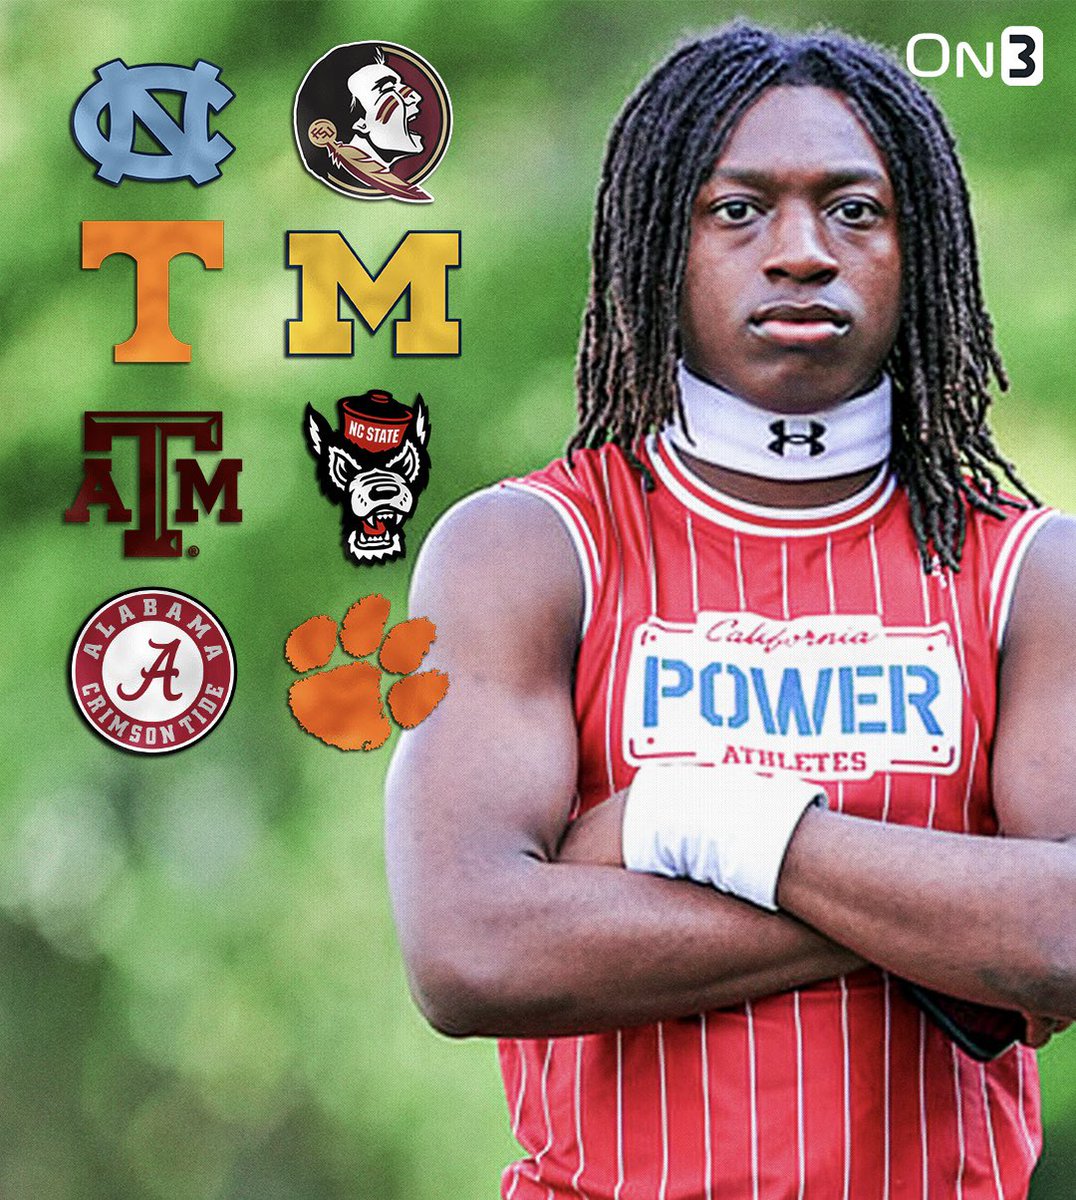 Elite 4-star safety Jordan Young tells @ChadSimmons_ 'three or four teams' currently have an advantage in his recruitment👀 Young ranks No. 38 NATL. (No. 4 SAF) in the 2025 class. Read: on3.com/news/a-few-sch…